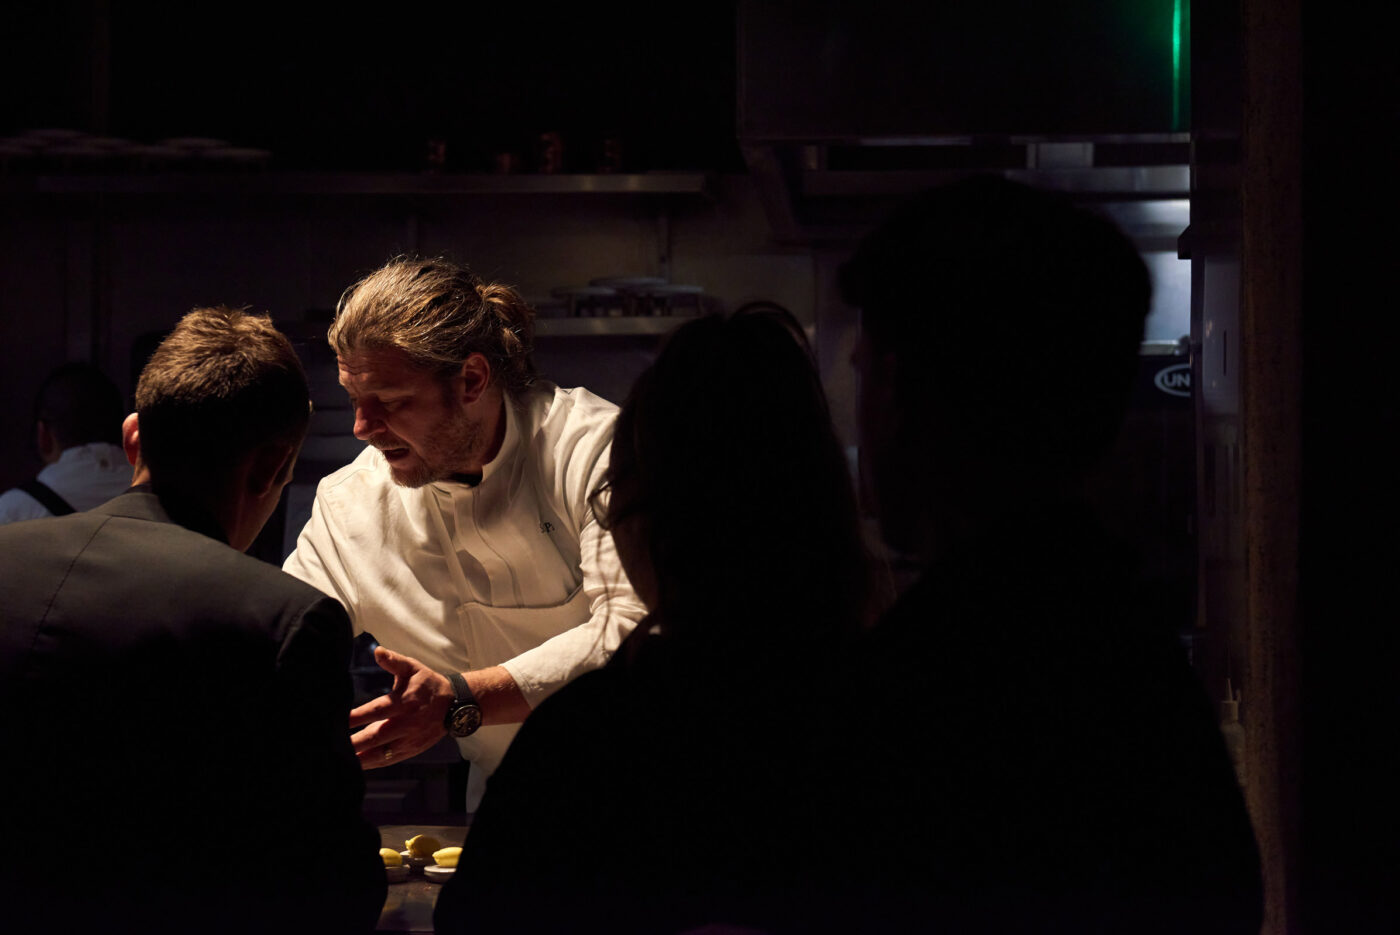 Scott Pickett joins Beulah in immersive dining first